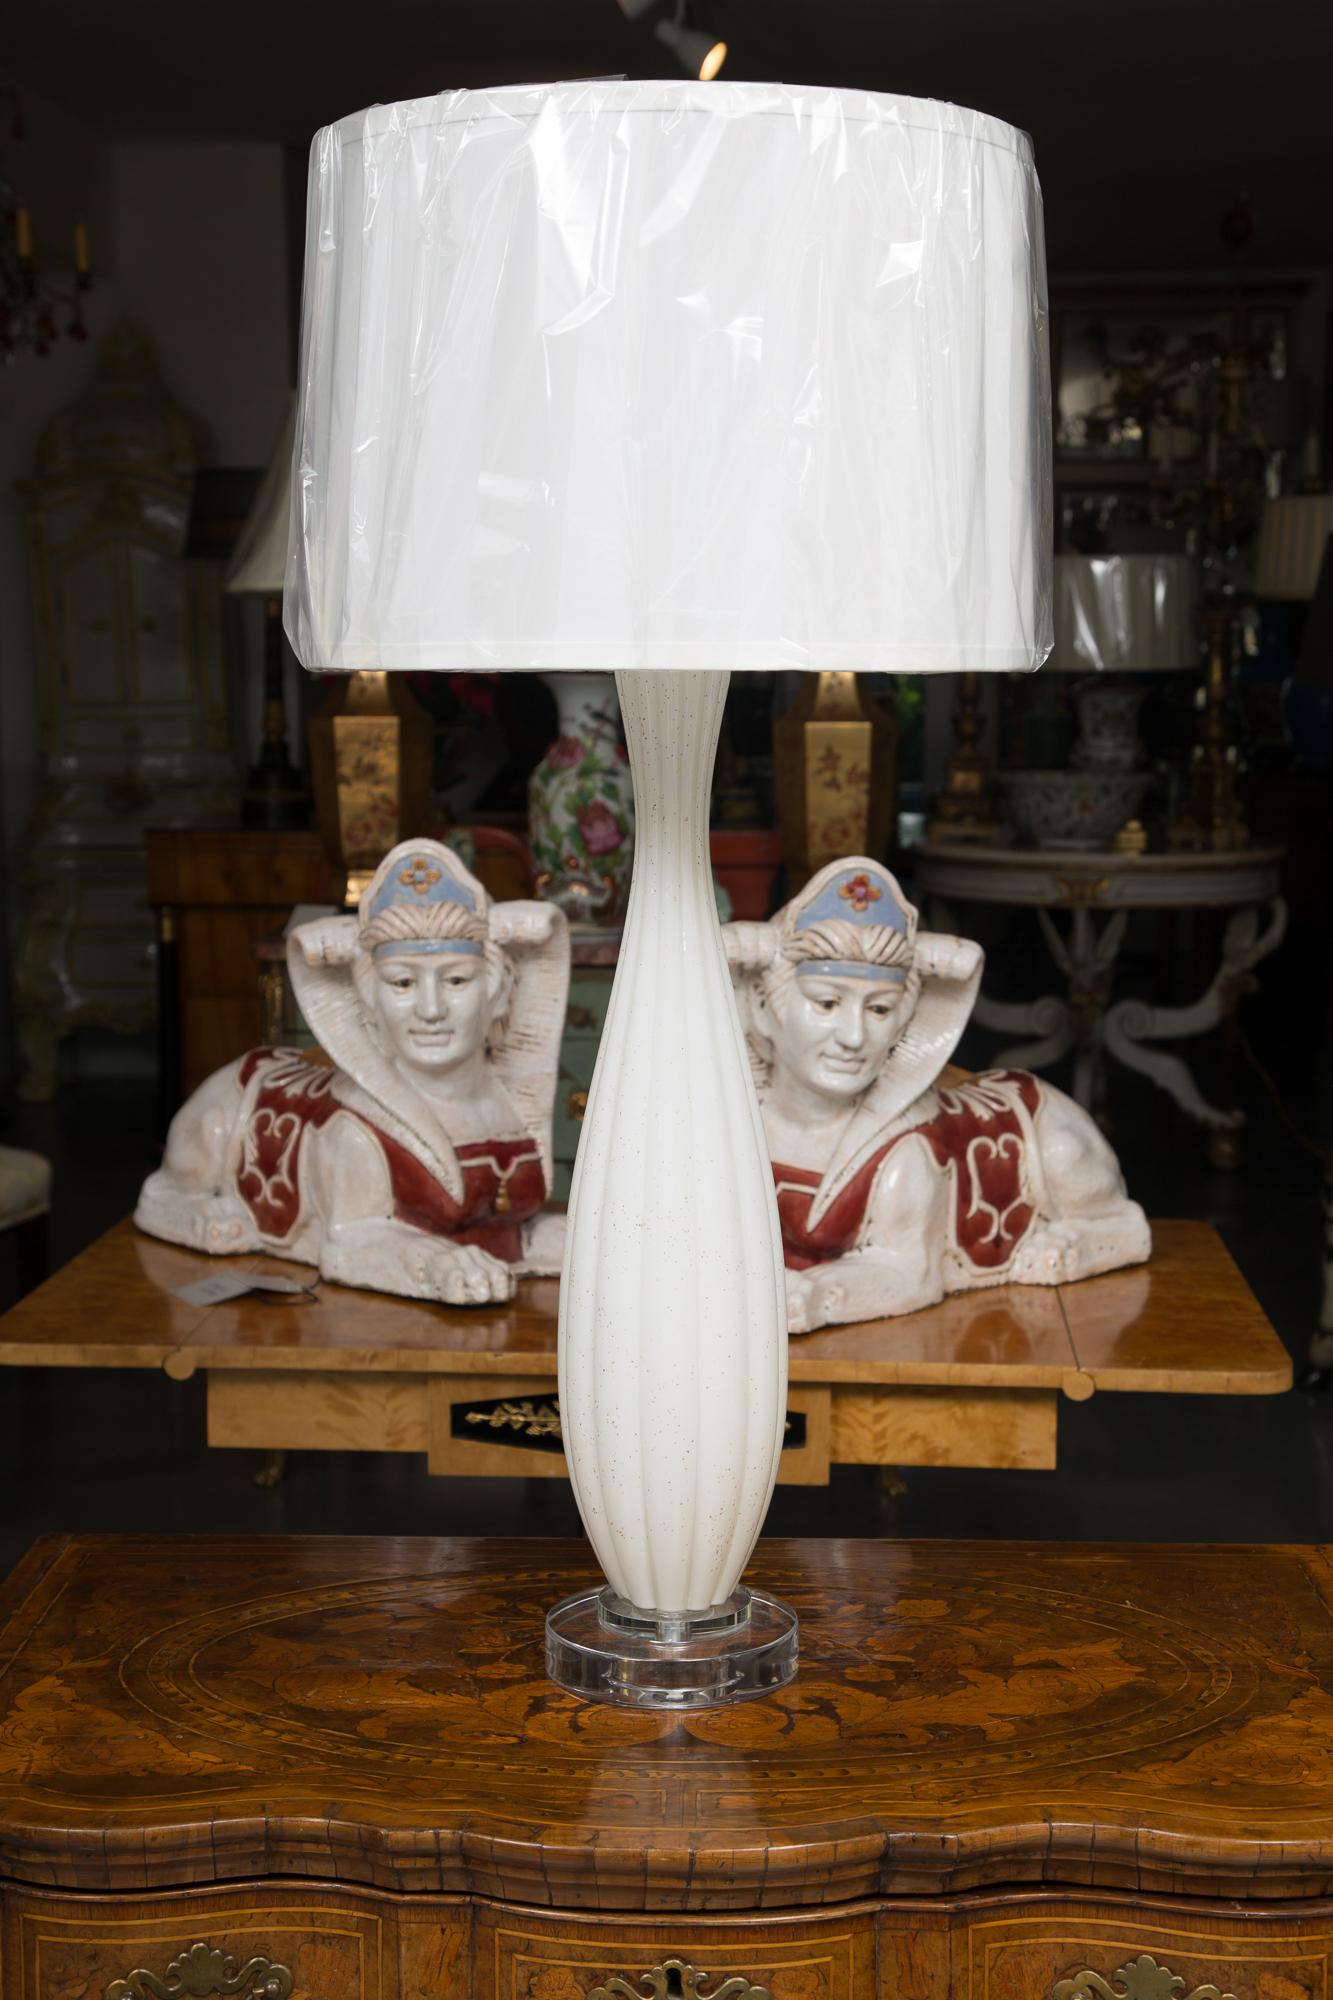 This is a good quality pair of Venetian hand blown glass as table lamps. The vase has been capped with plexiglass and is situated on a double stepped plexiglass base, as well. The lamps are fluted - white, with subtle flecks of gold, 20th century.